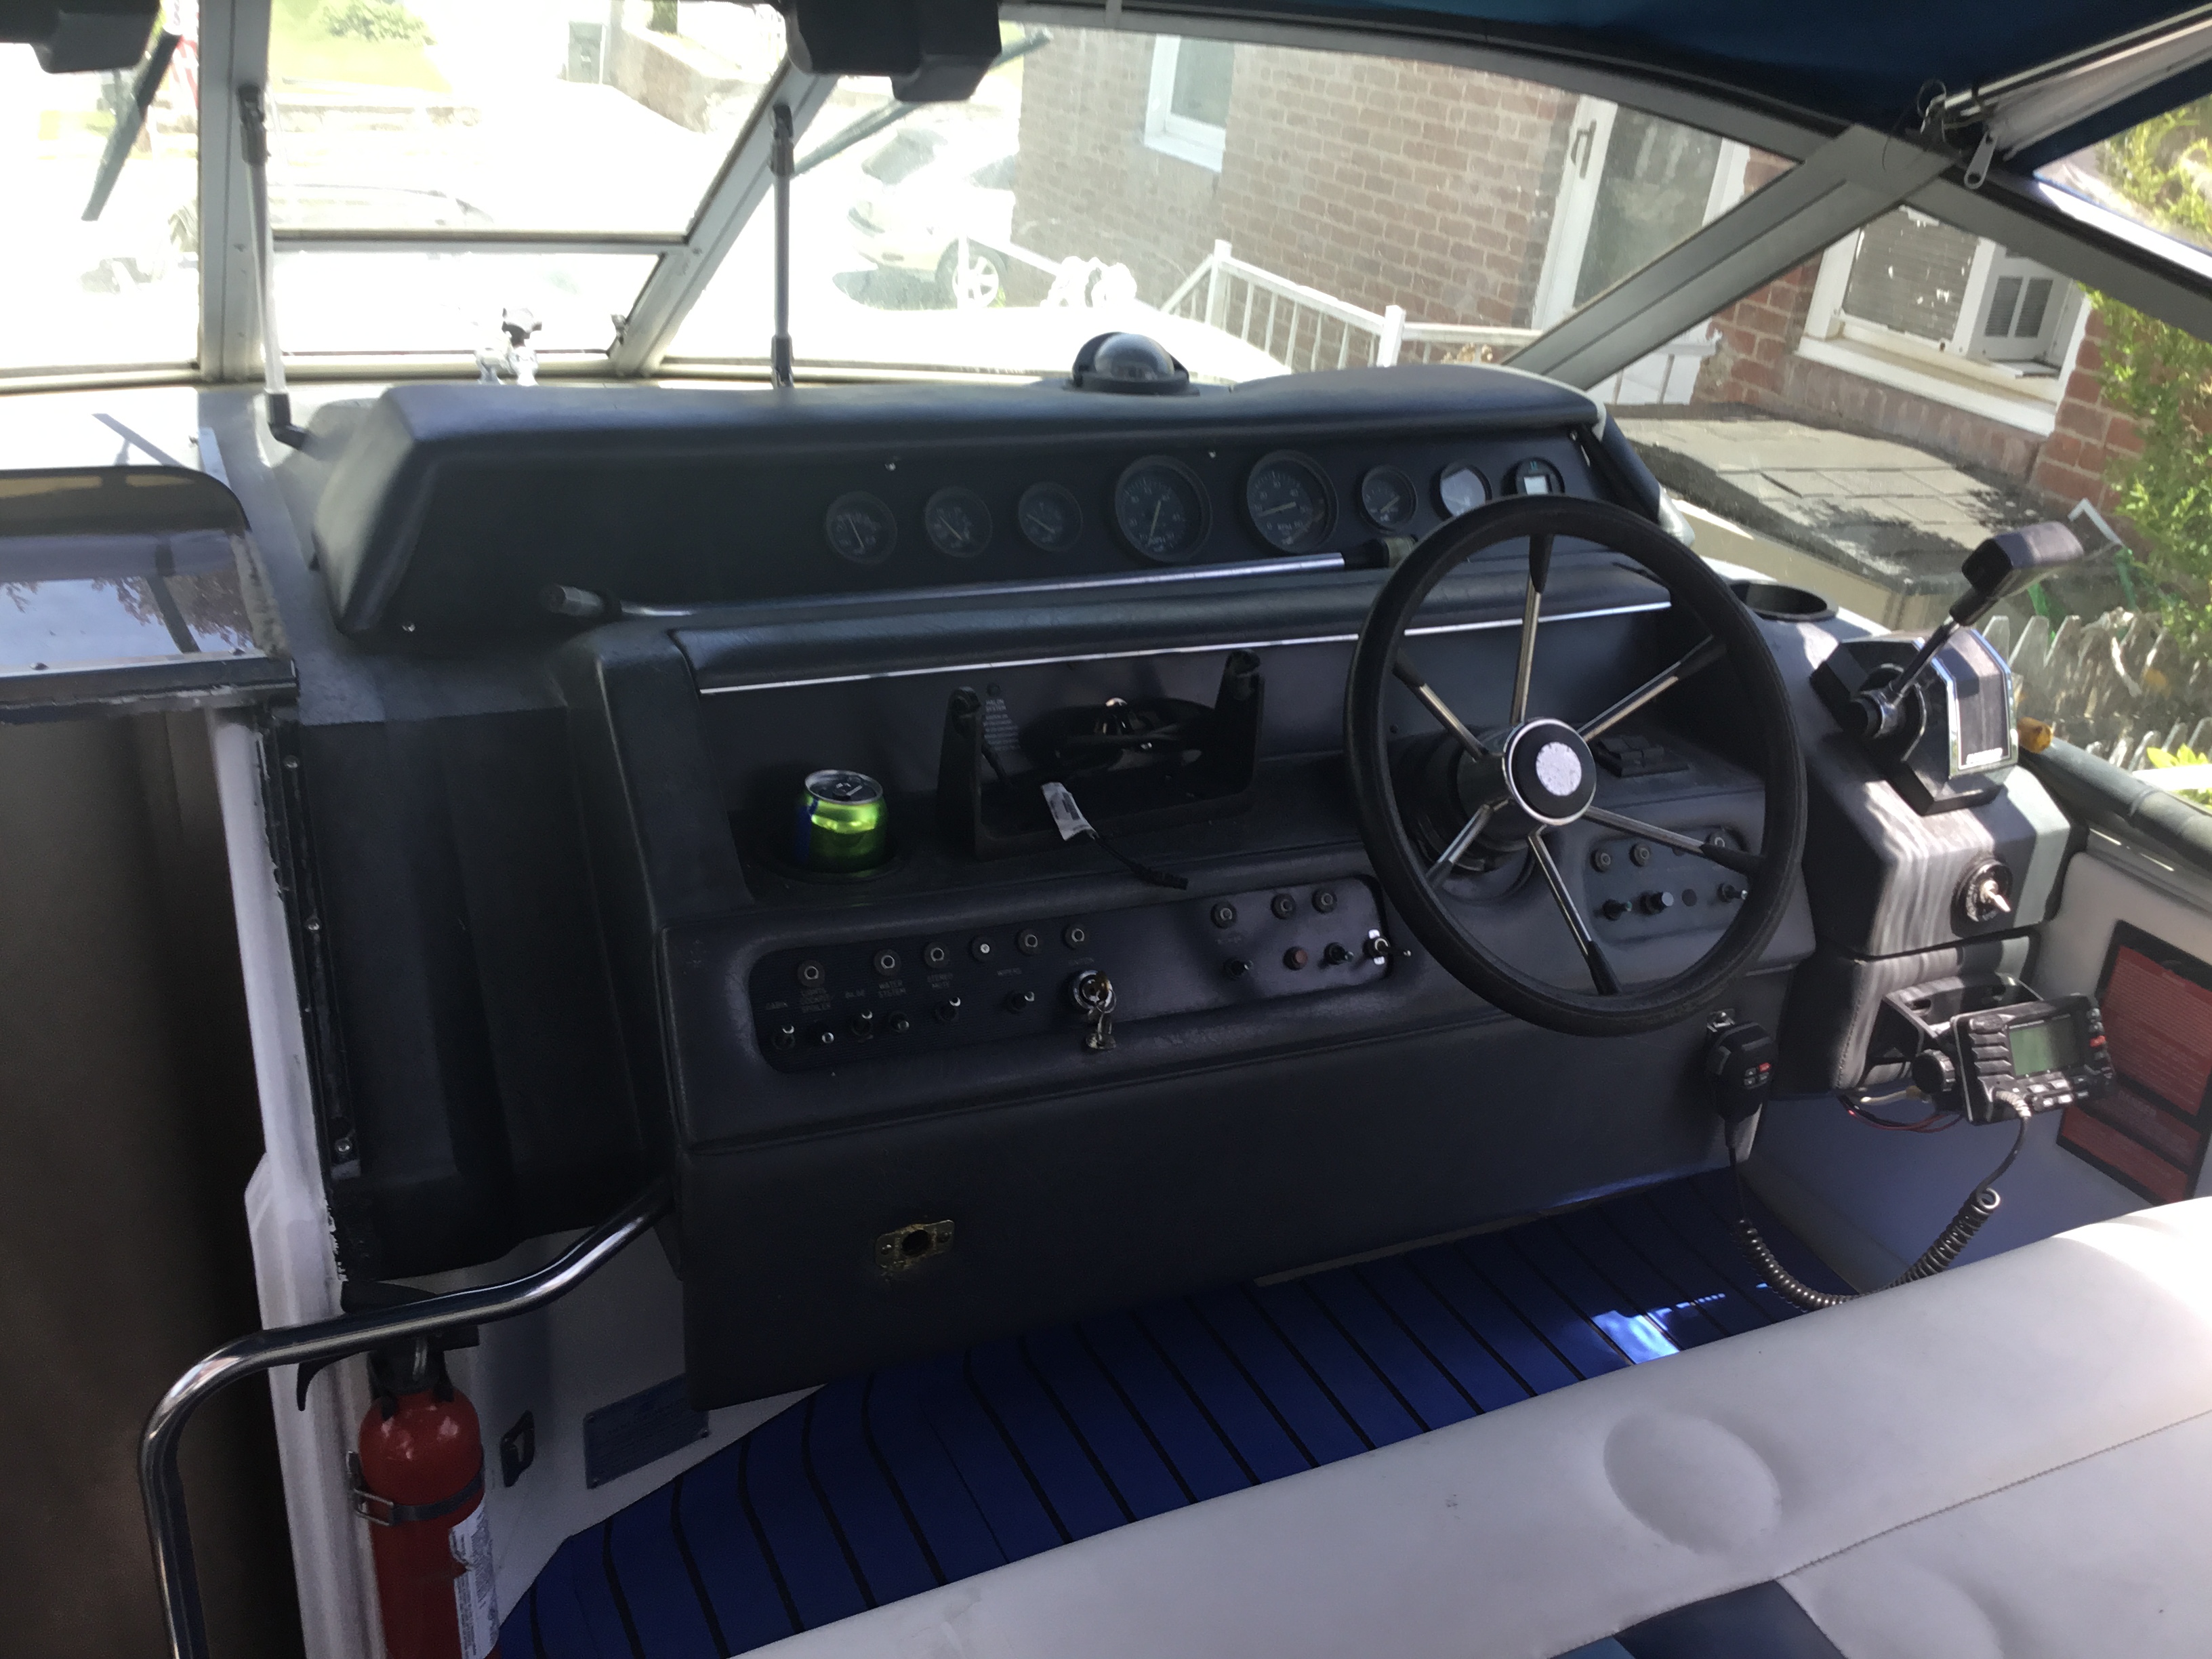 1993 30 foot Sea Ray Cabin CR Power boat for sale in New London, CT - image 7 